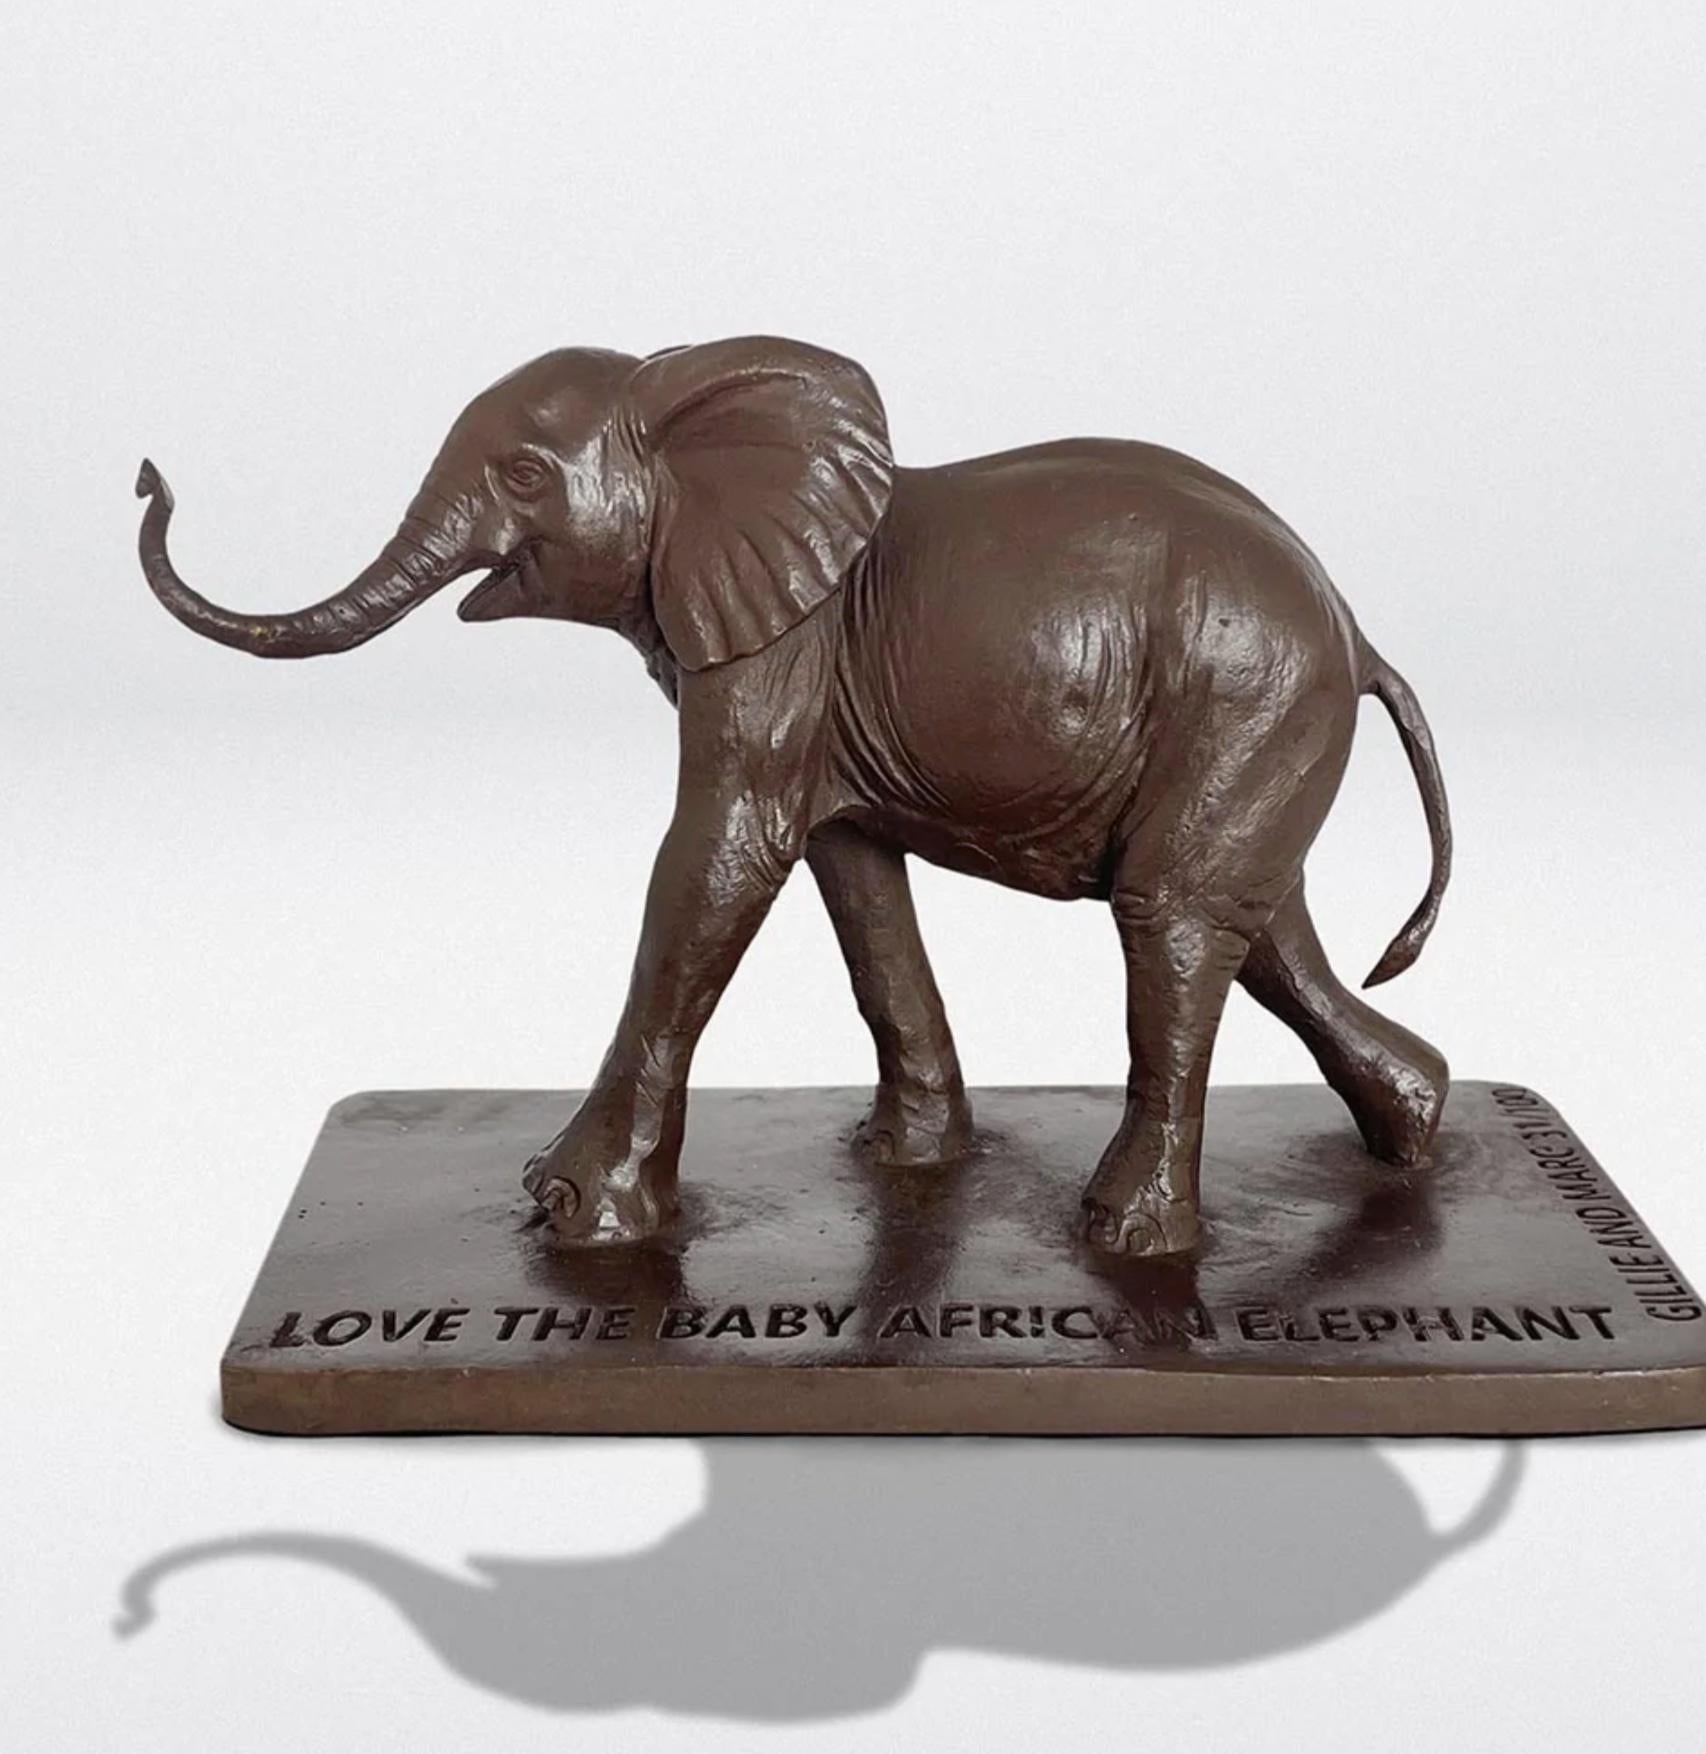 Gillie and Marc Schattner Figurative Sculpture - Authentic Bronze Love the Baby African Elephant Sculpture by Gillie and Marc